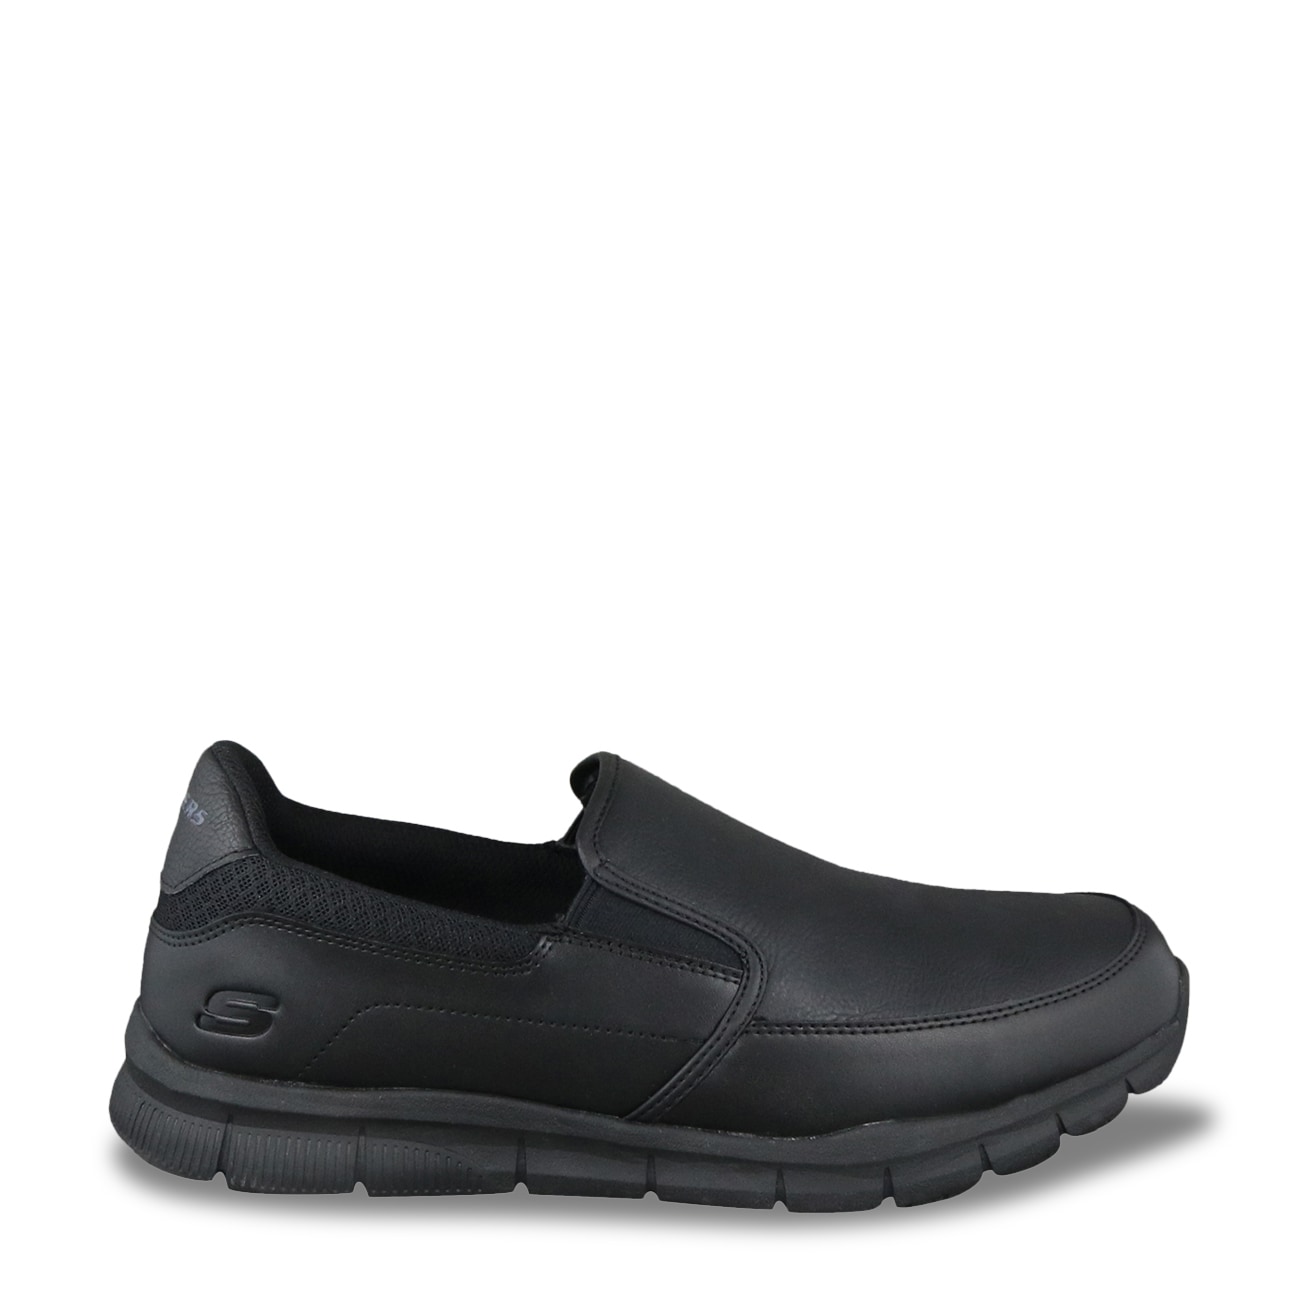 mens slip on dress shoes canada